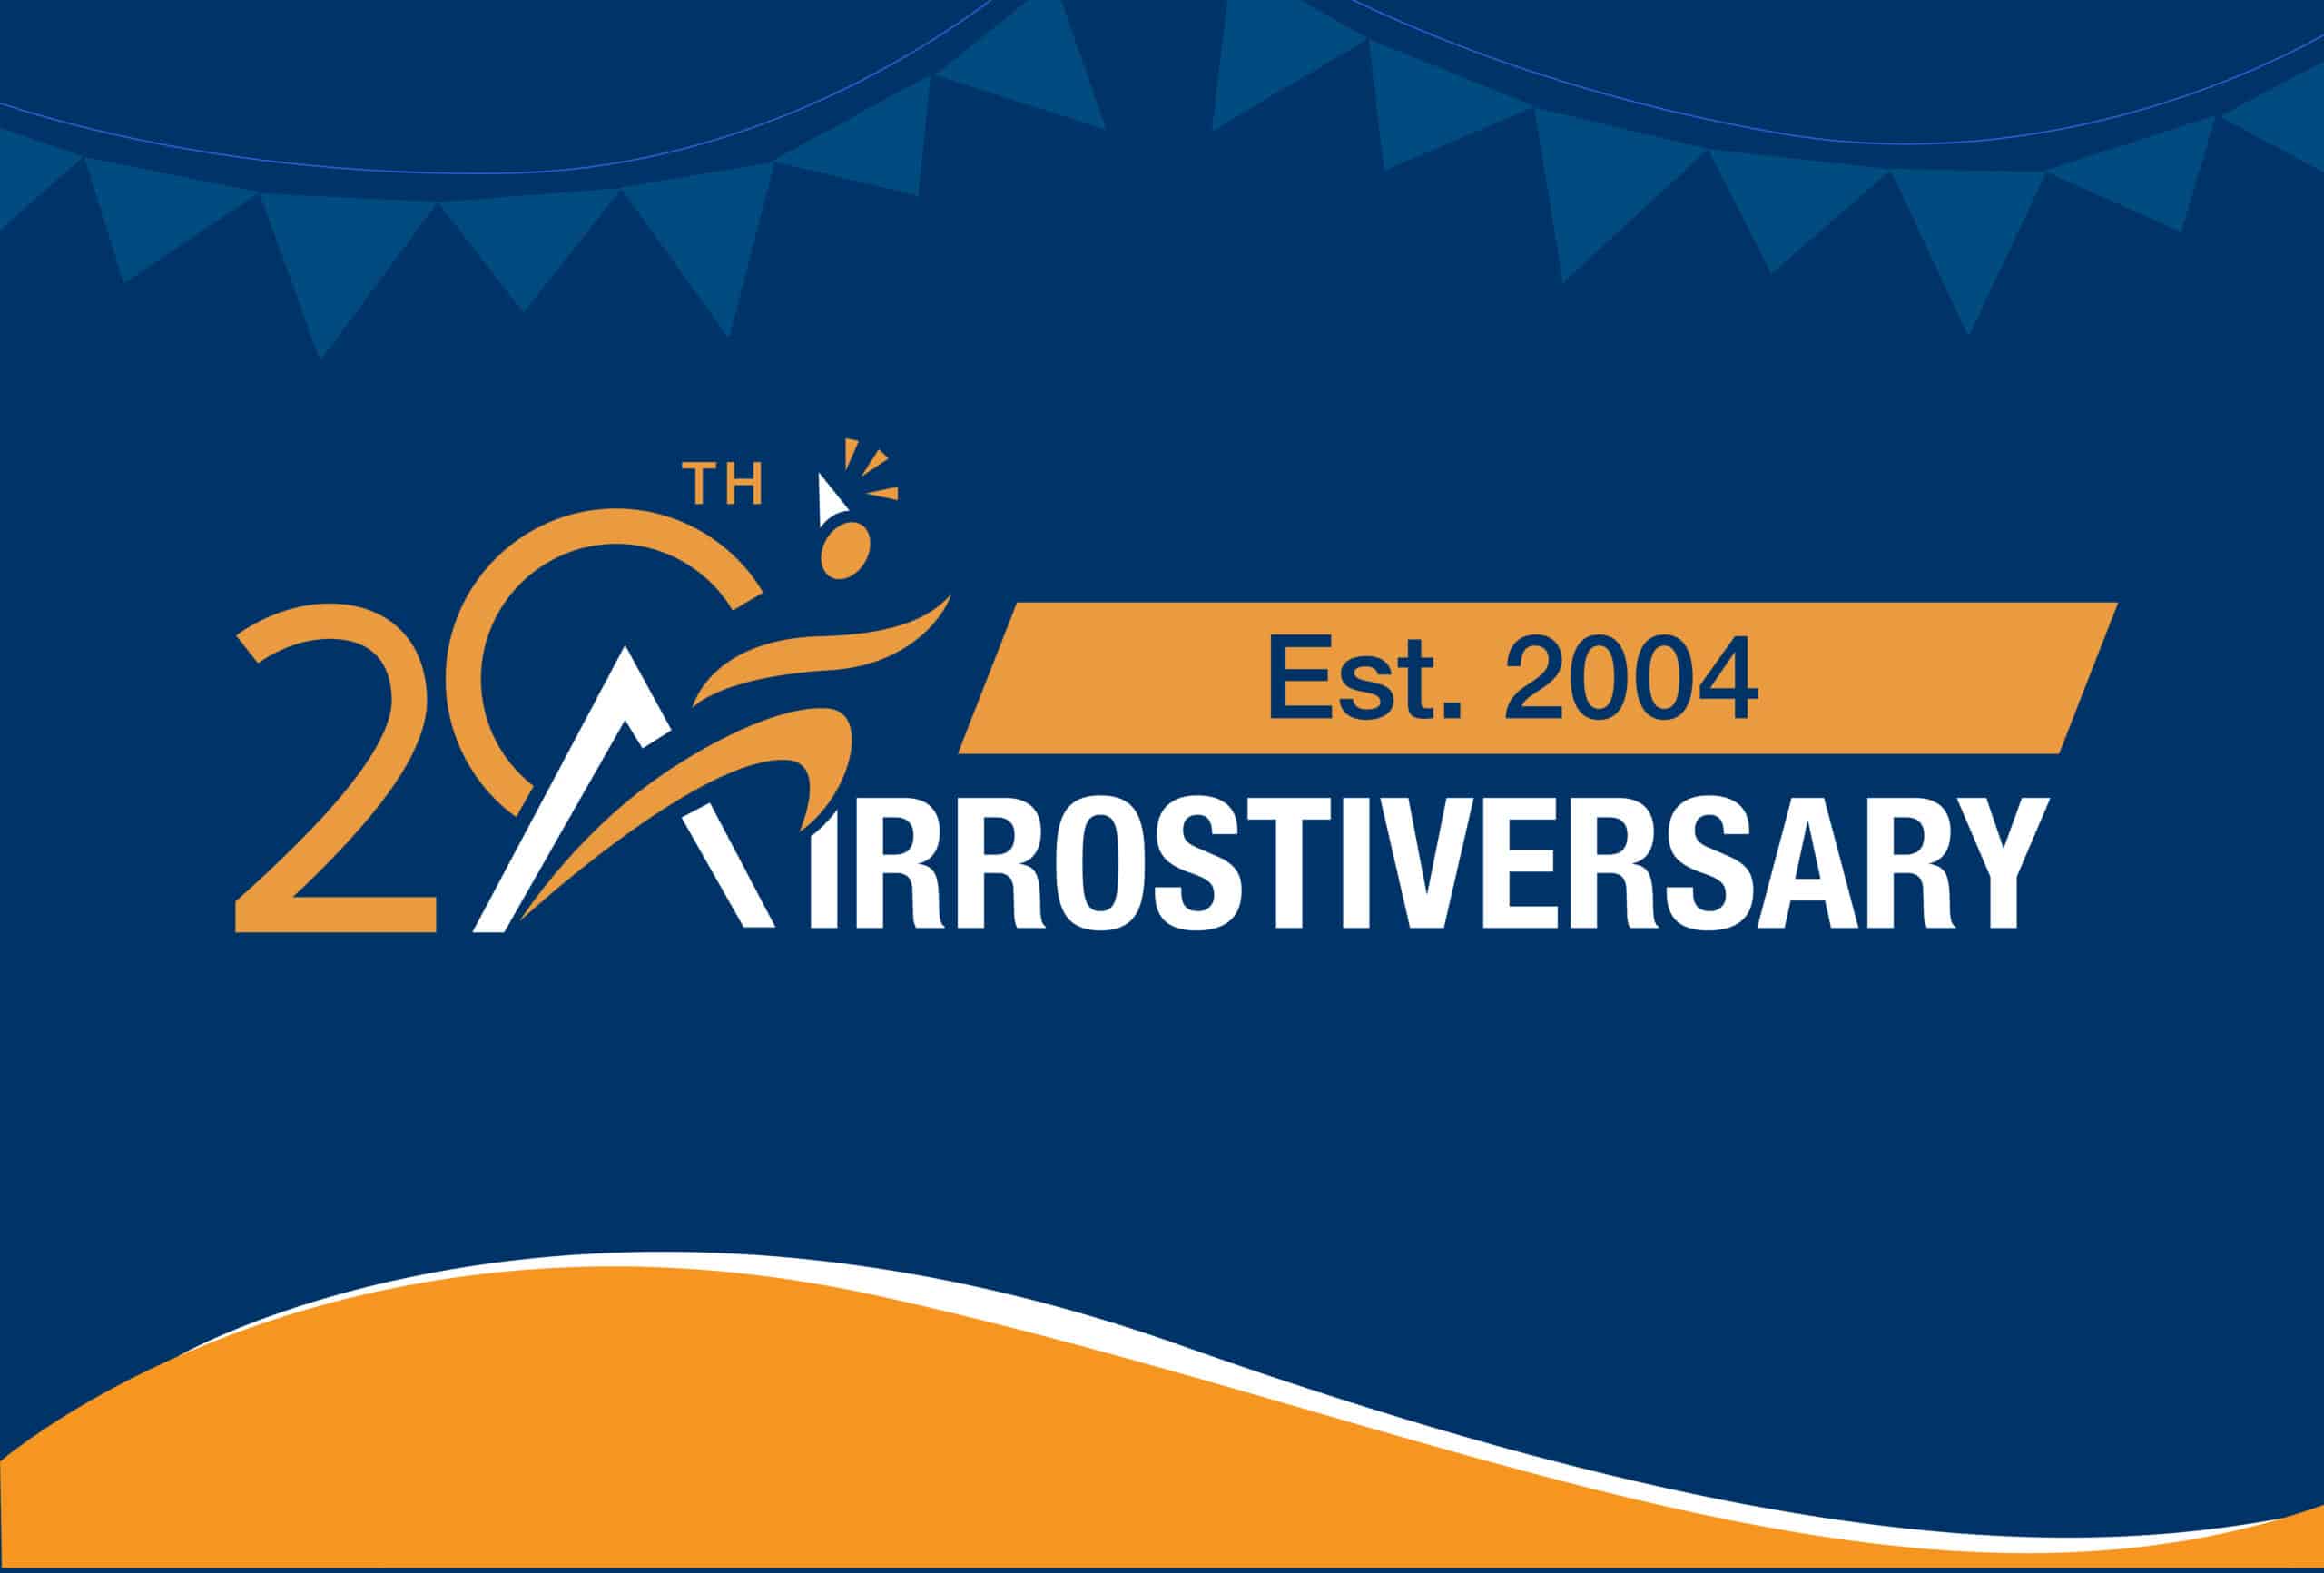 Airrosti celebrates 20 years of business